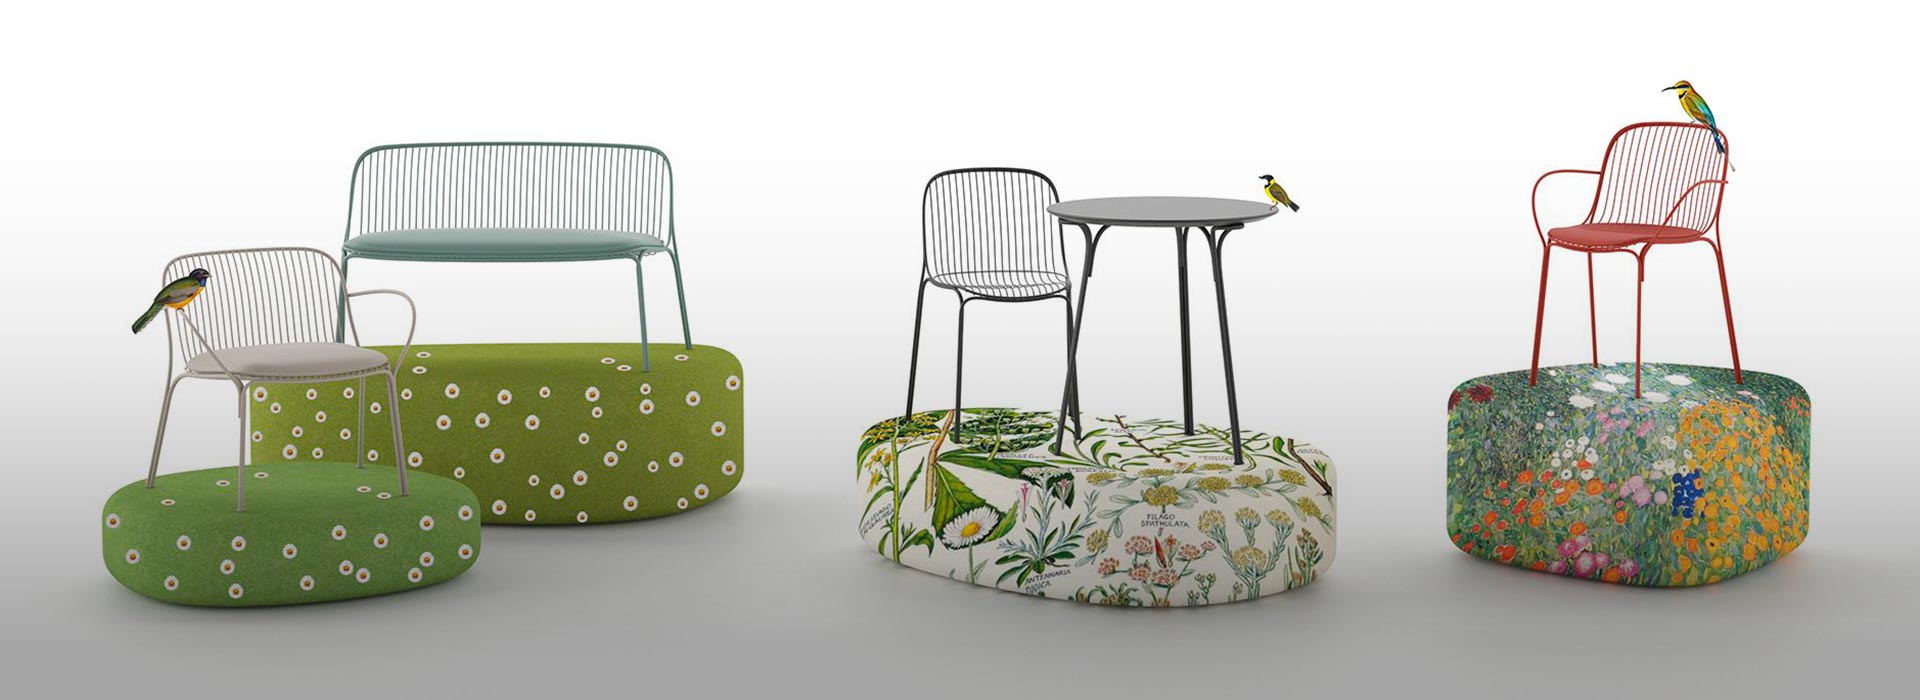 Live the summer with HiRay: the new outdoor collection by Kartell